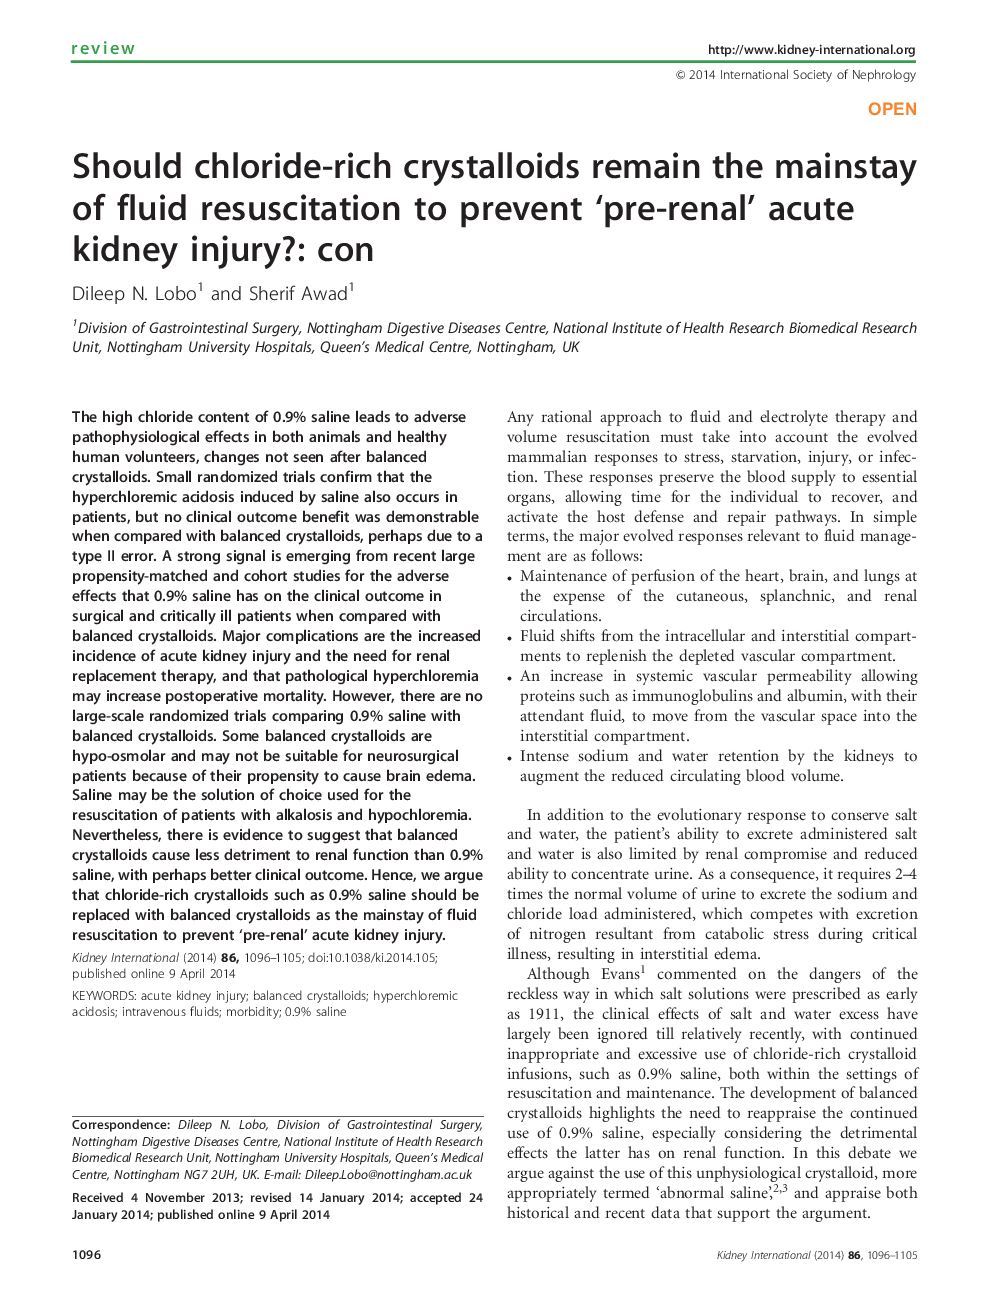 Should chloride-rich crystalloids remain the mainstay of fluid resuscitation to prevent 'pre-renal' acute kidney injury?: con